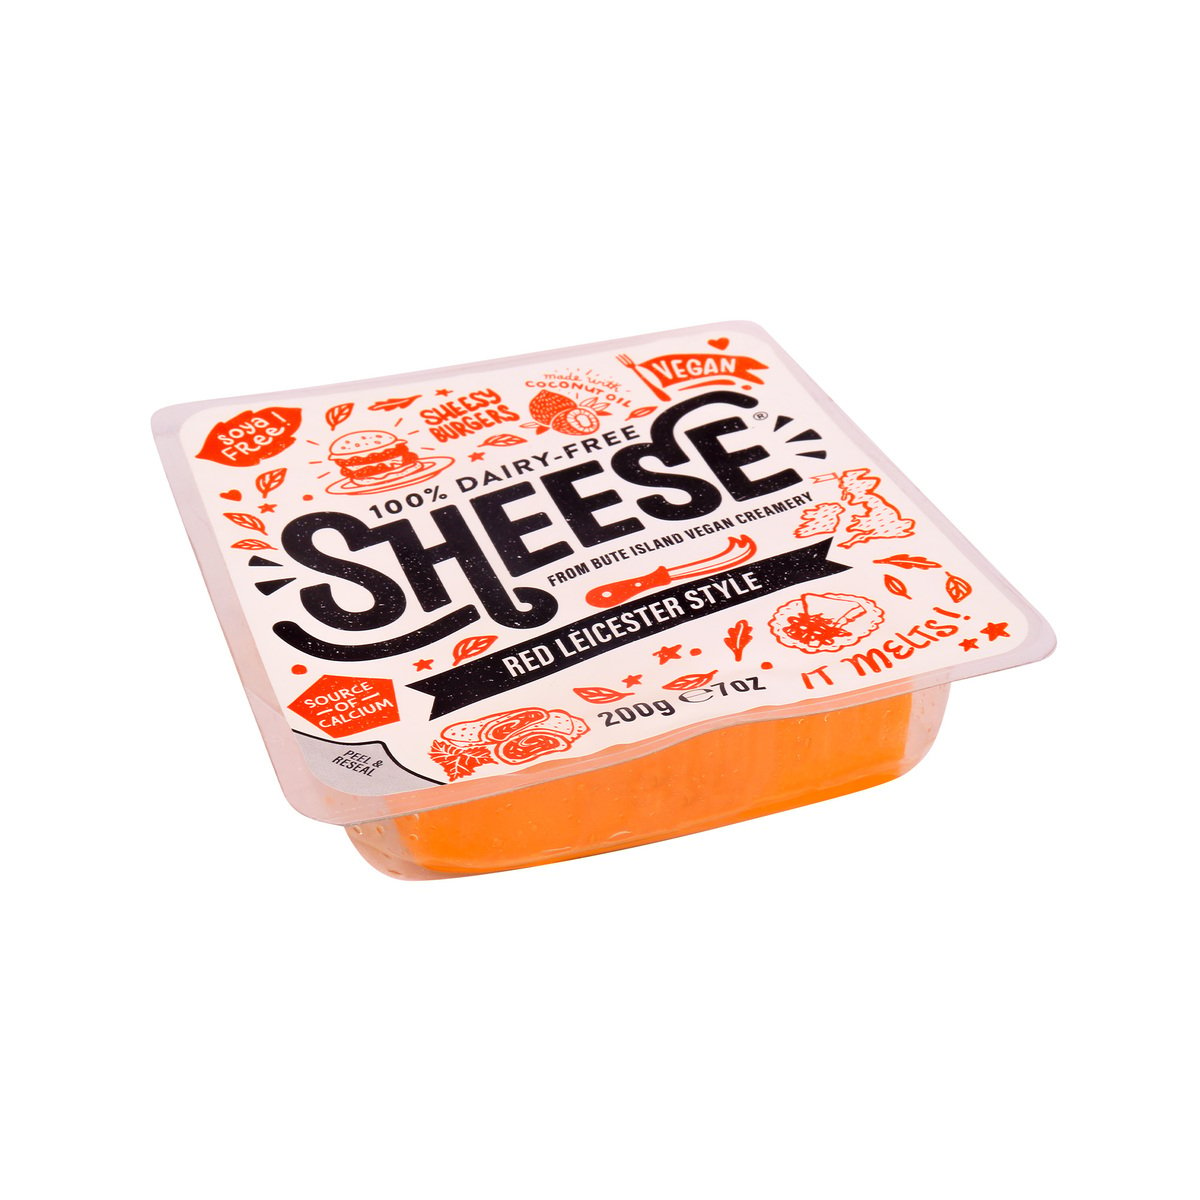 Sheese Red Leicester Style Block 200 g